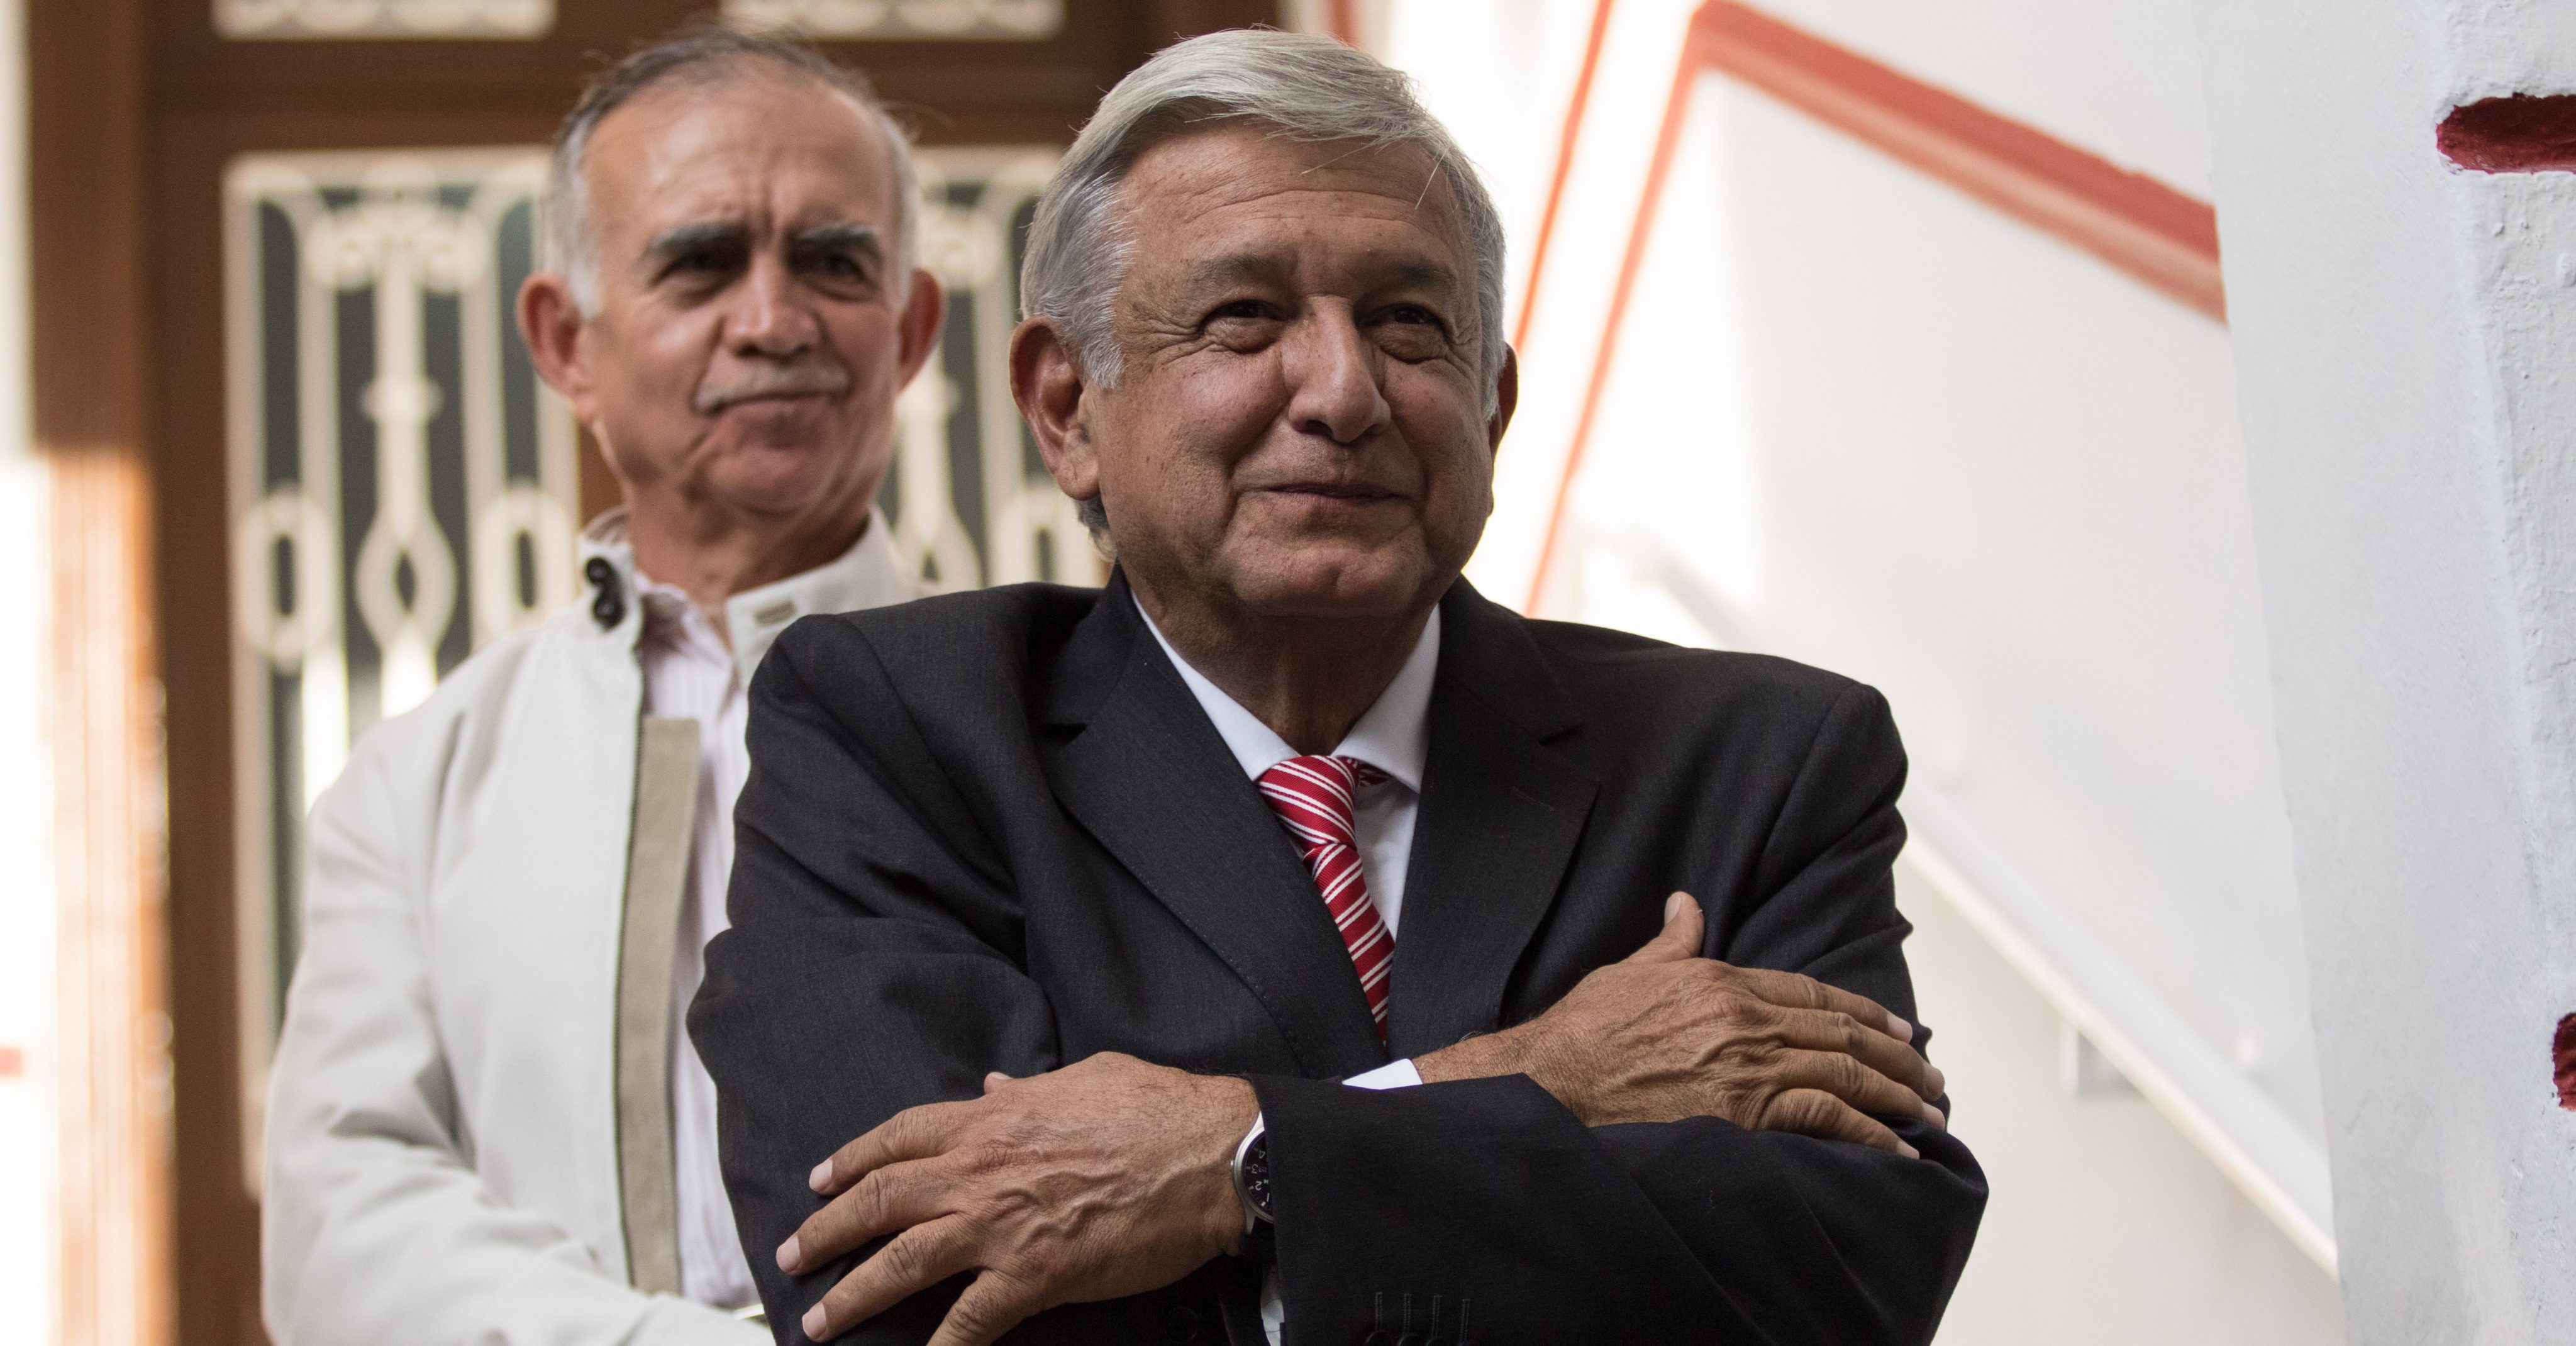 AMLO will have an Advisory Board composed of entrepreneurs